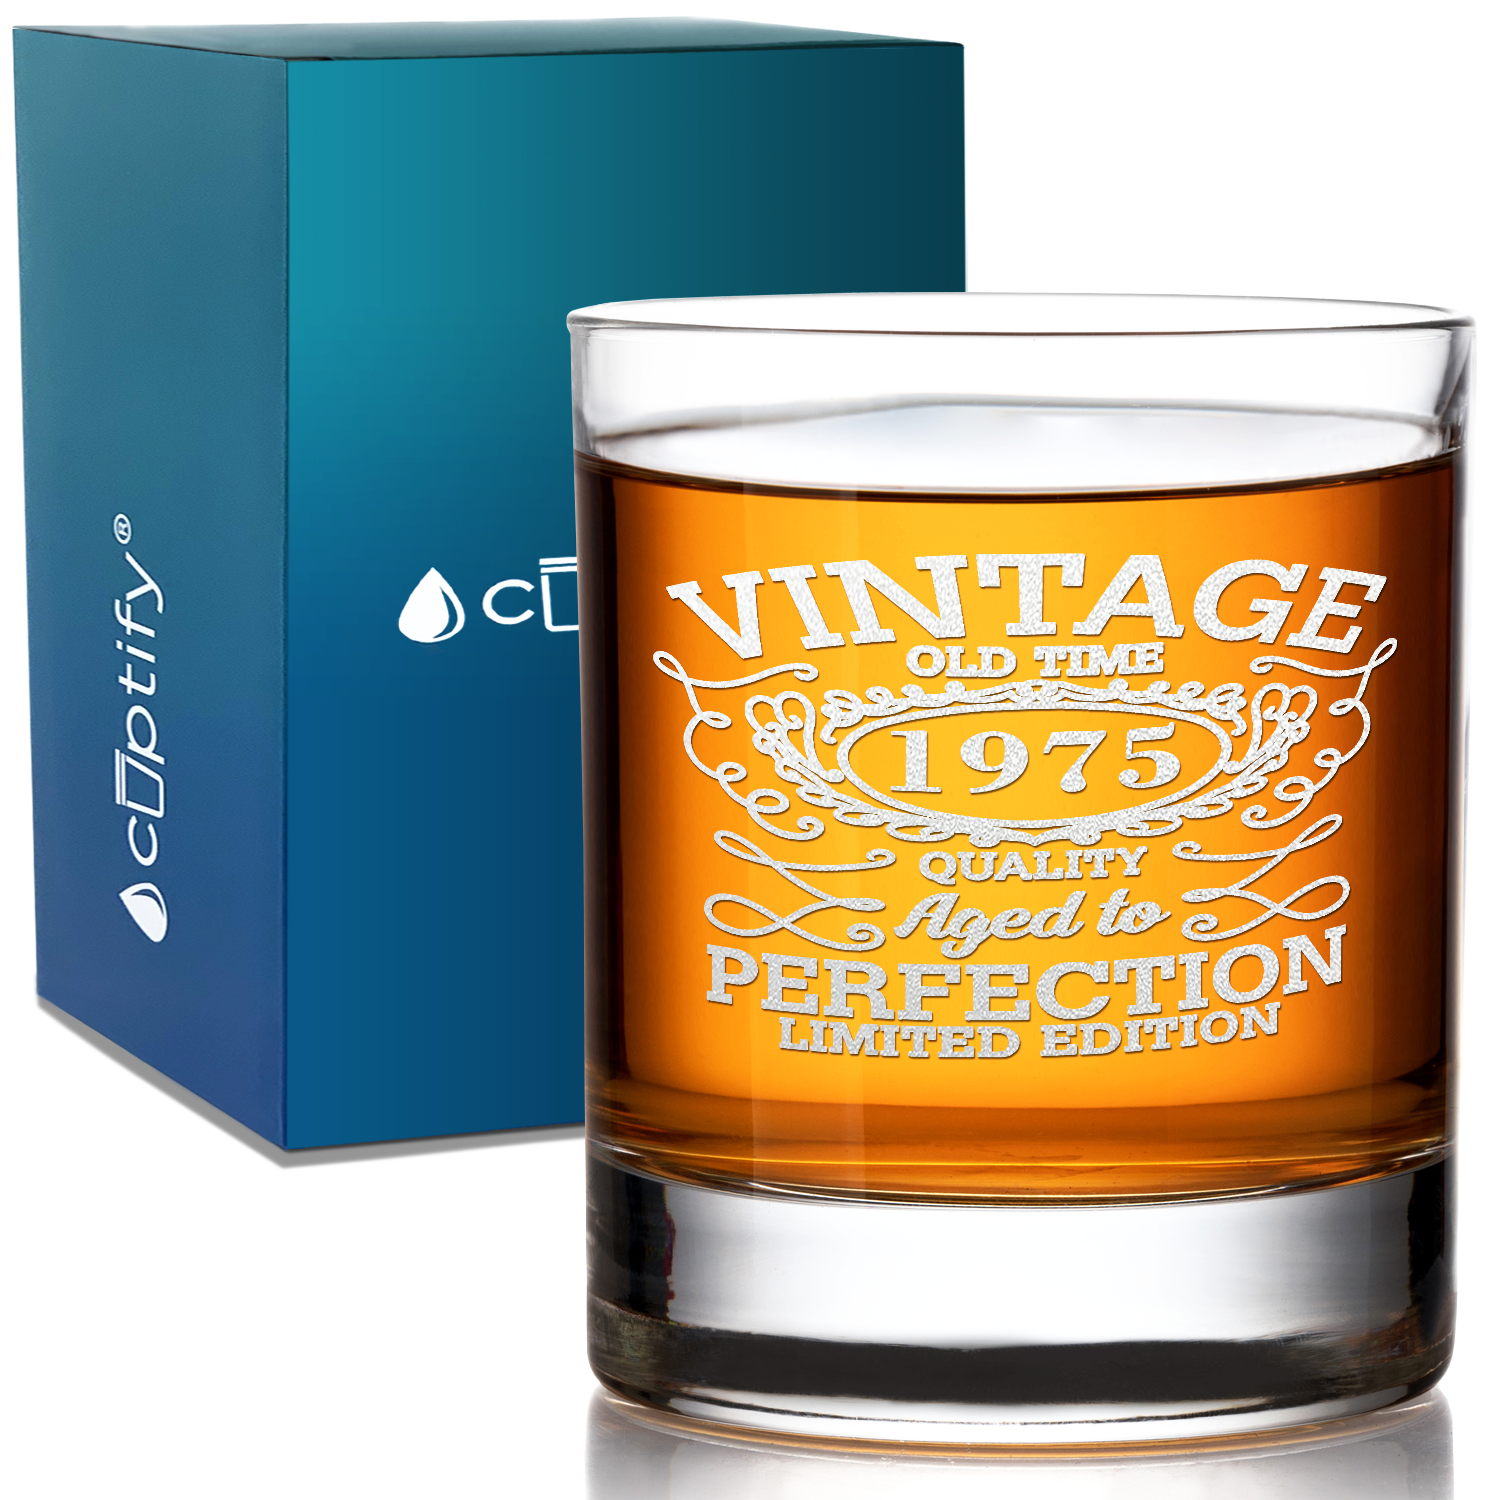 46th Birthday Vintage 46 Years Old Time 1975 Quality Laser Engraved 10.25oz Old Fashion Glass